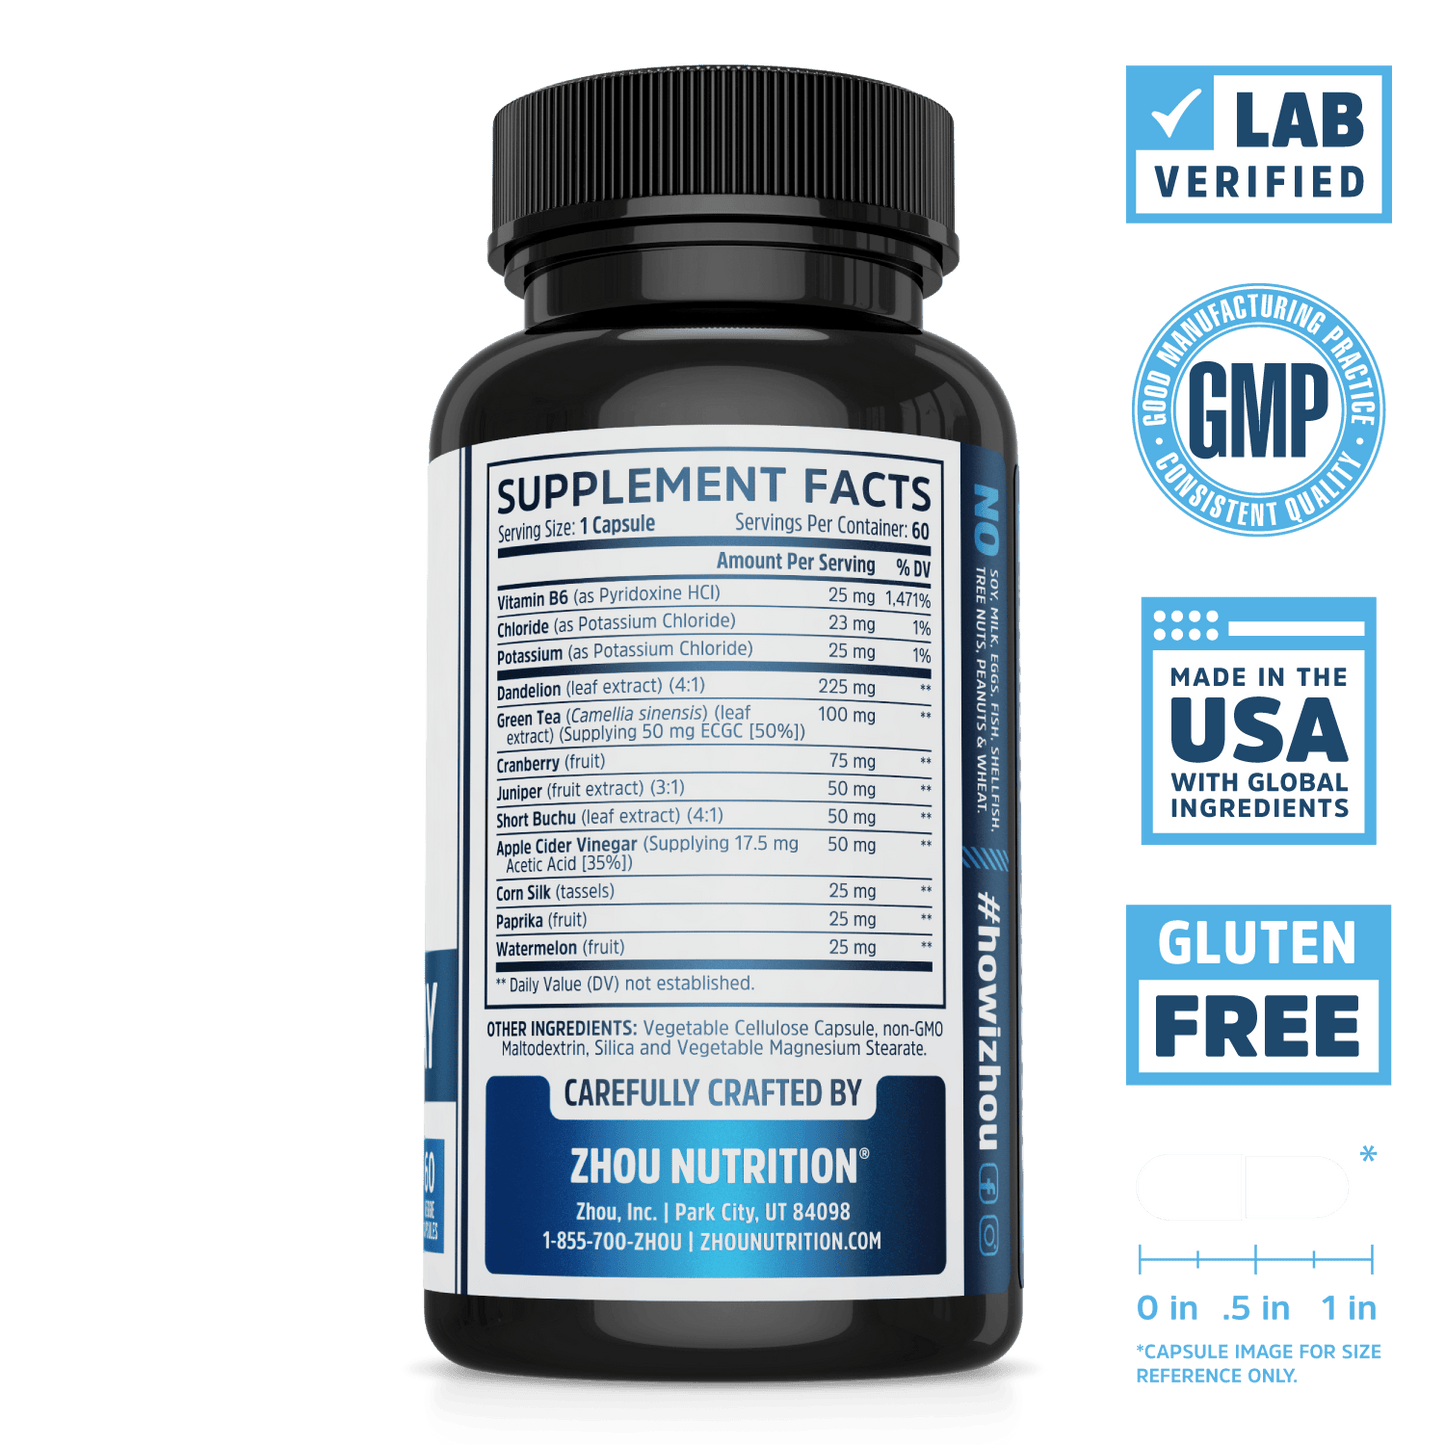 Zhou Nutrition Water Away for Healthy Fluid Balance. Bottle side. Lab verified, good manufacturing practices, made in the USA with global ingredients, gluten free.